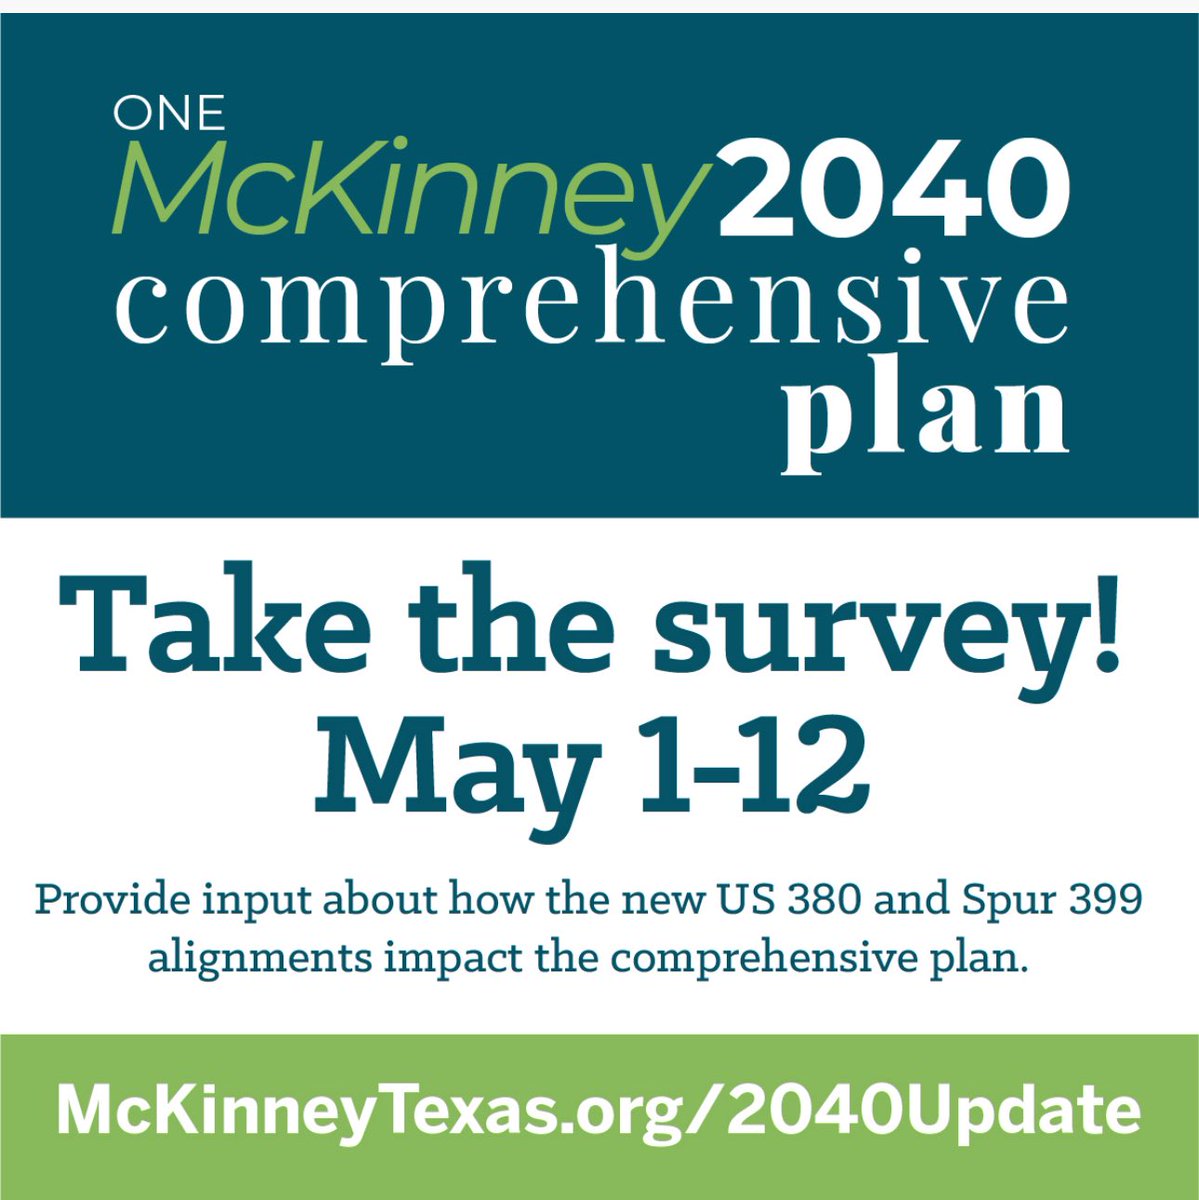 The City of McKinney seeks feedback on the ONE McKinney 2040 Comprehensive Plan & whether amendments are needed due to the Texas Dept. of Transportation release of the final alignments for the U.S. 380 Corridor & Spur 399. Survey in English & Spanish: surveymonkey.com/r/J3ZPN2K